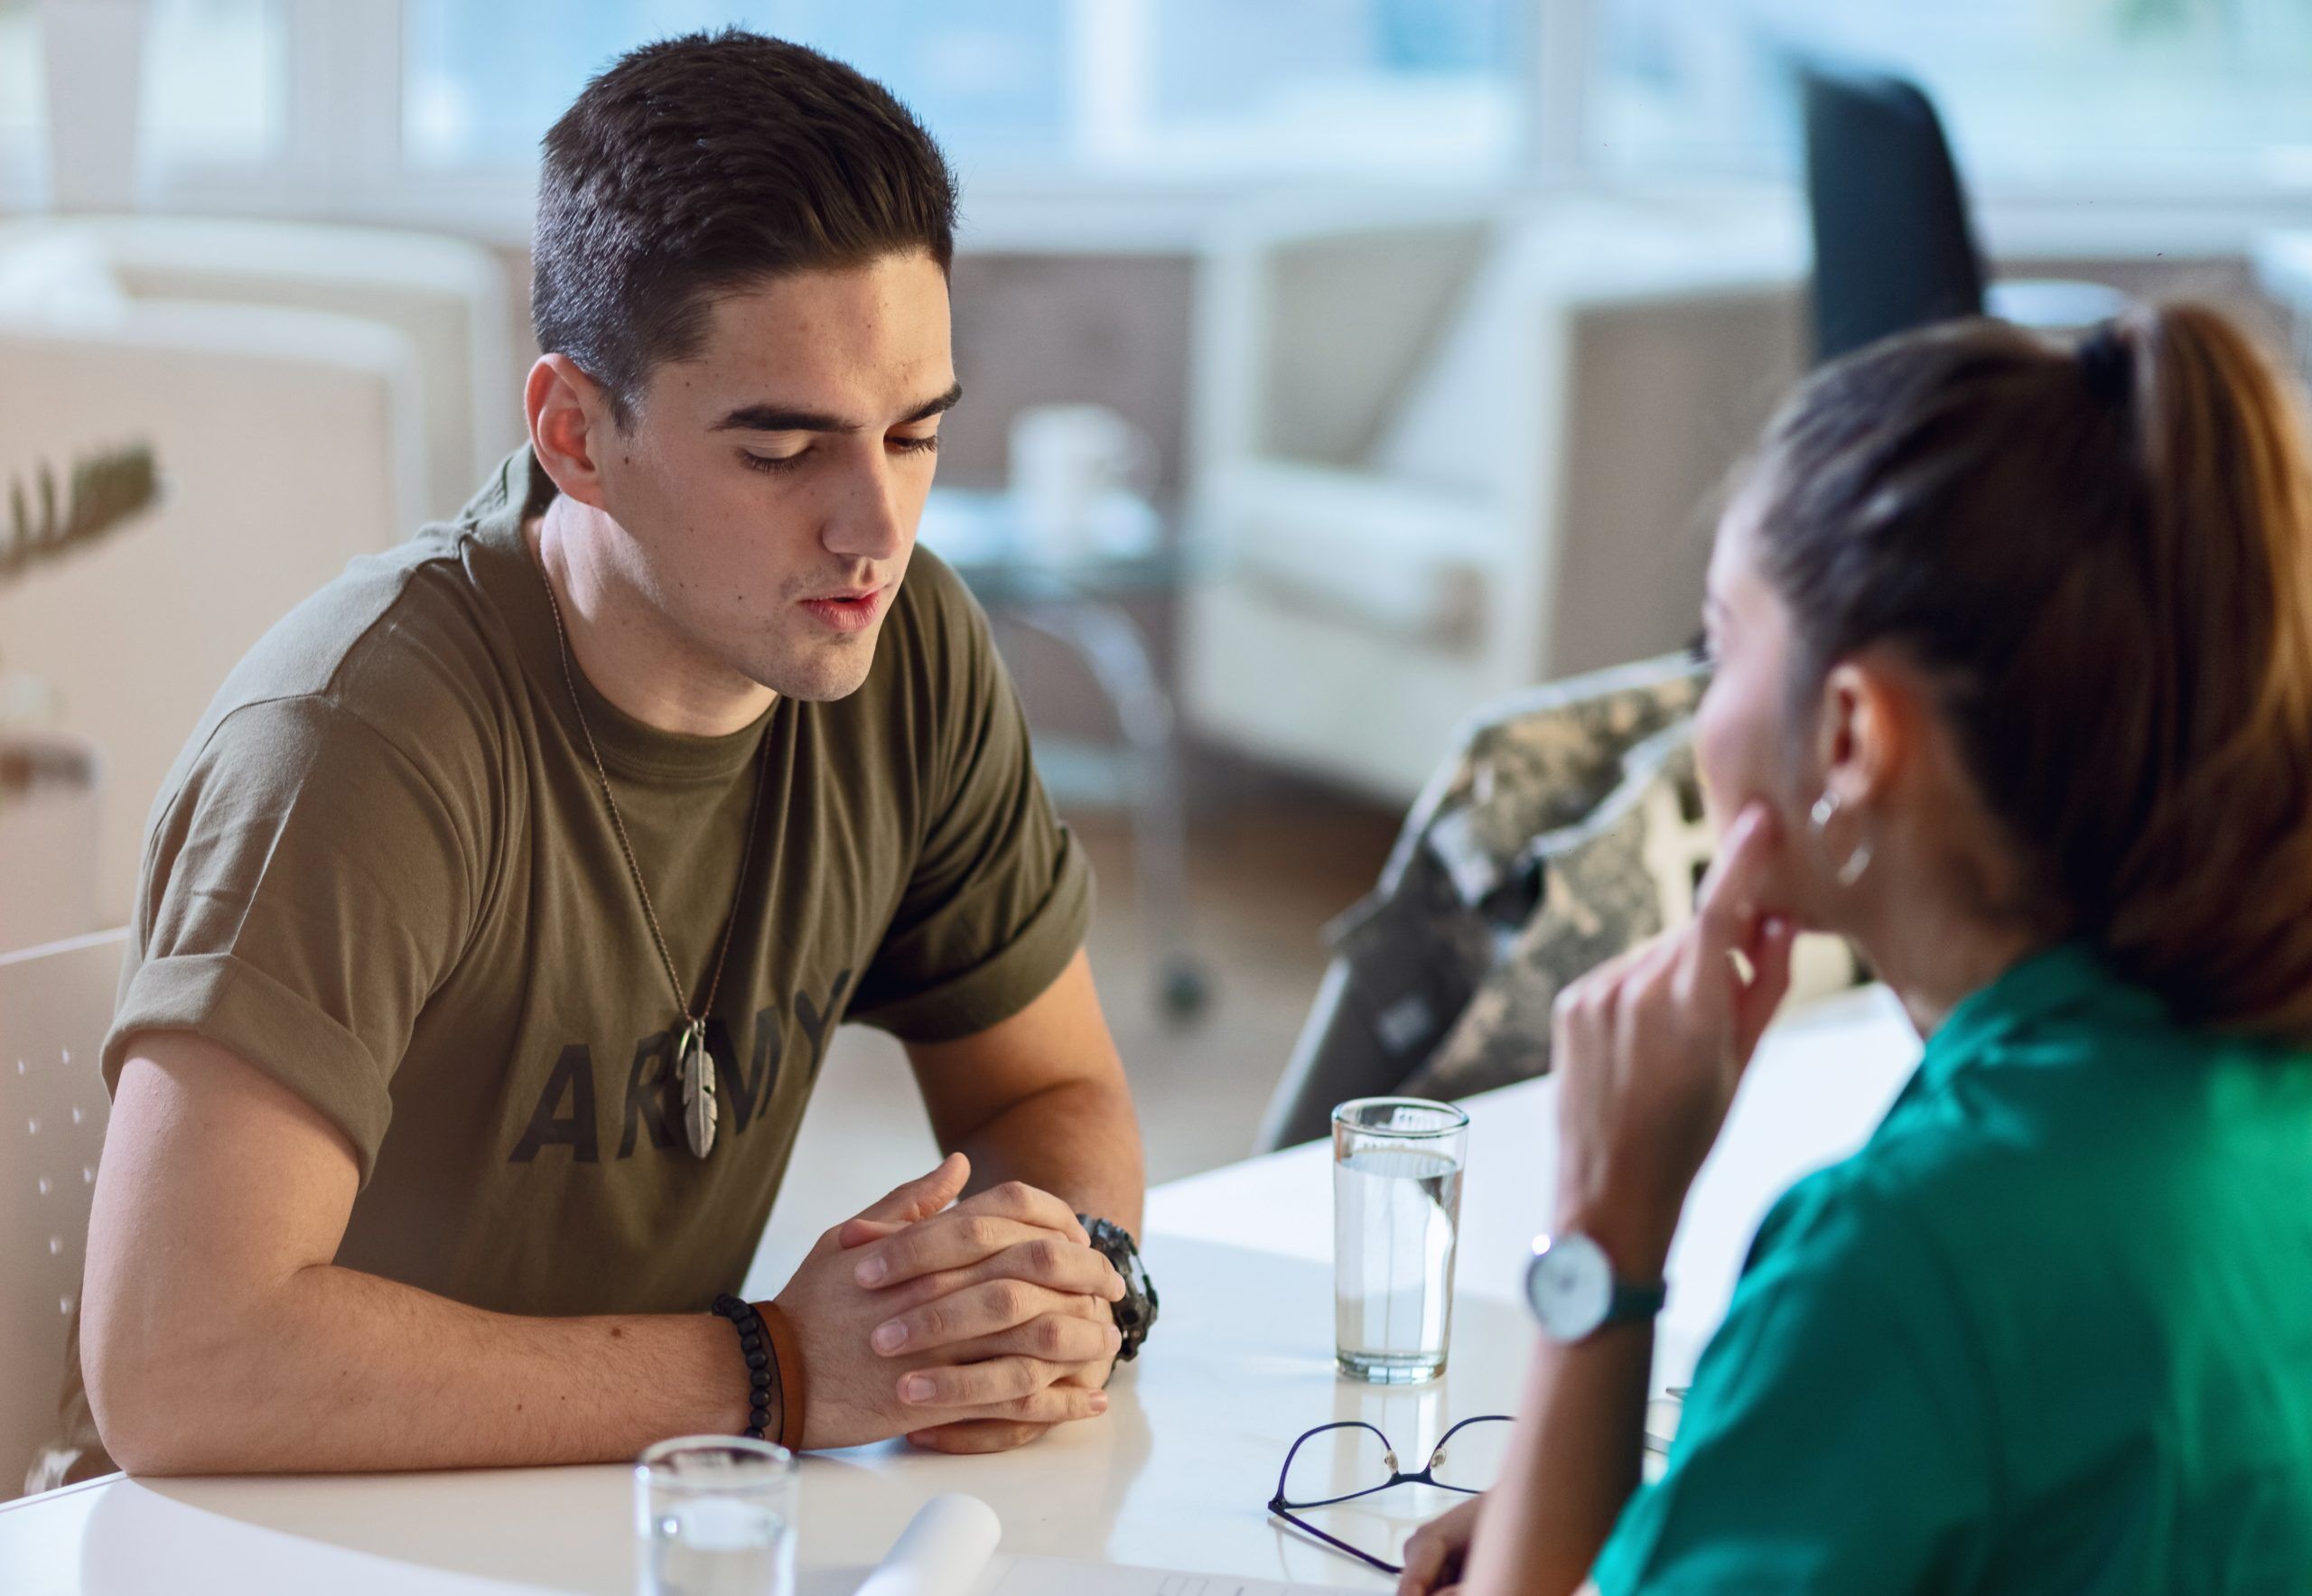 A soldier talking to a doctor. It's just a stock image, it's not deep.